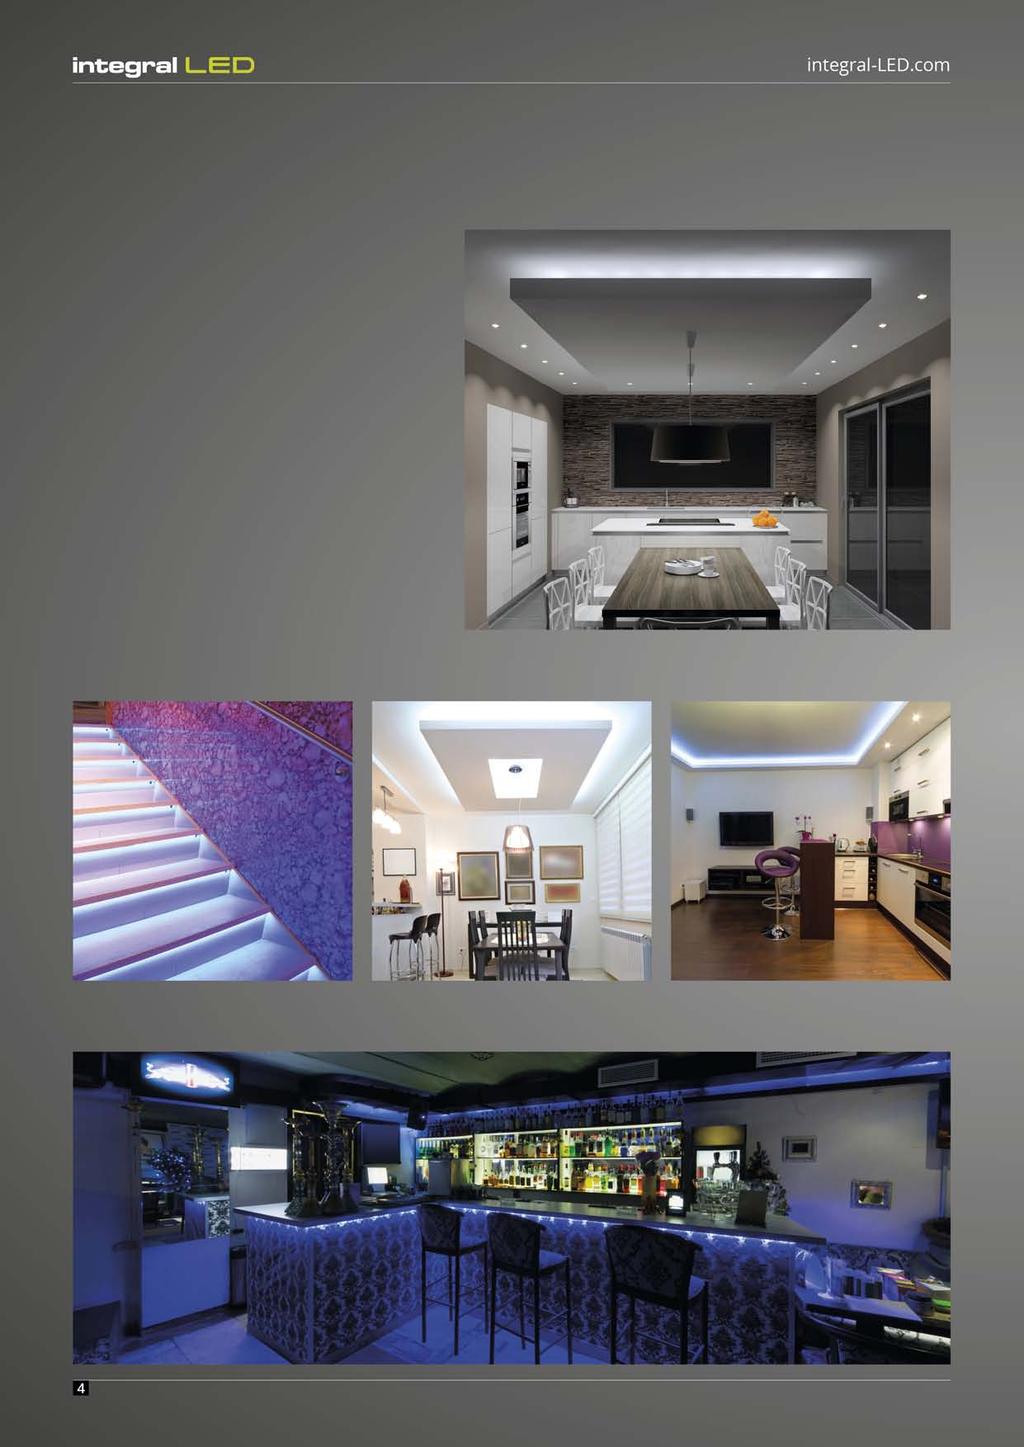 Flexible Strip Energy efficient Integral LED strips make a great addition to any domestic or commercial environment.